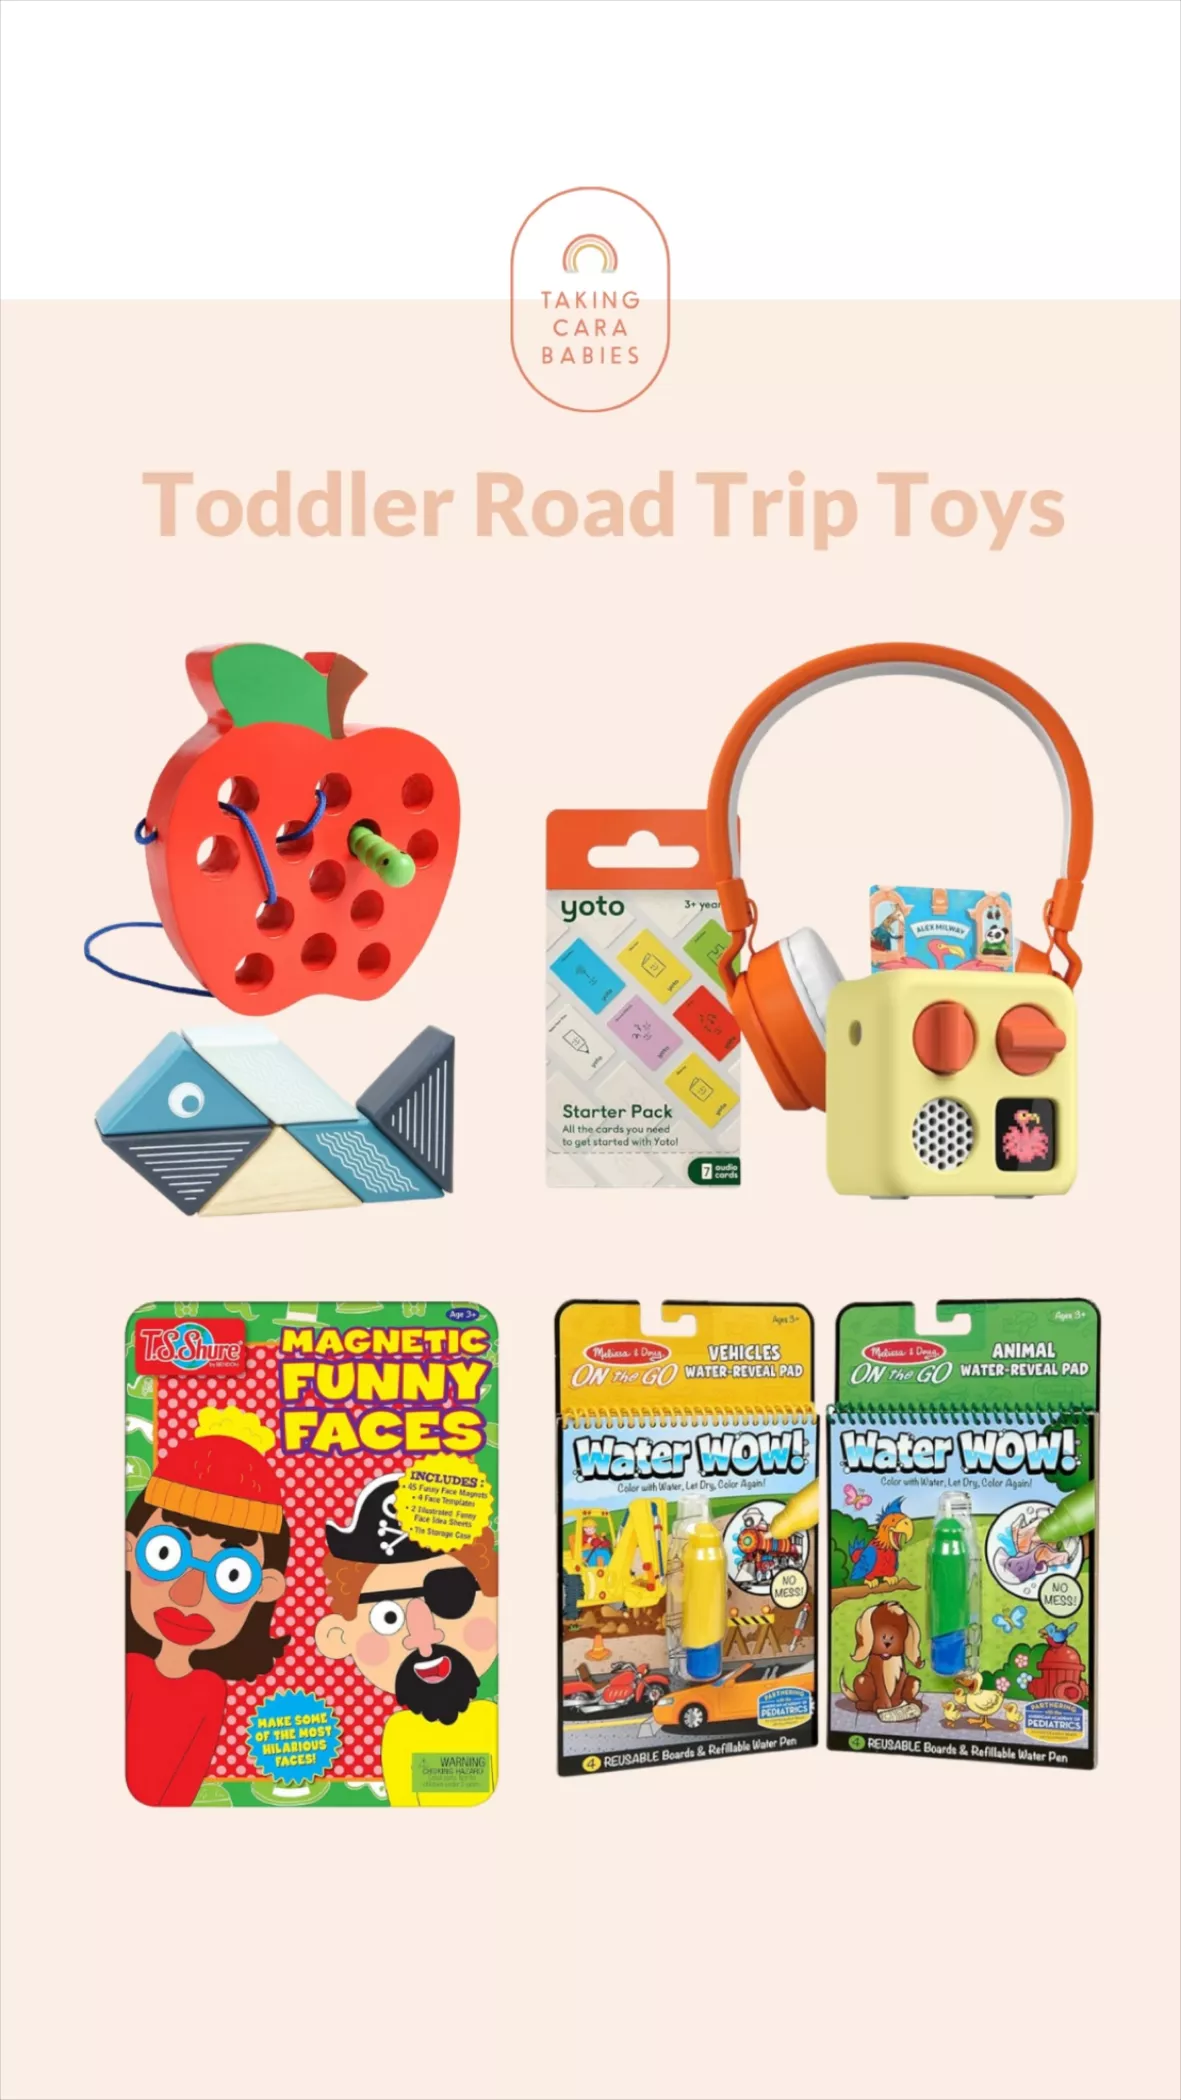 Best Travel Toys For Toddlers & Babies